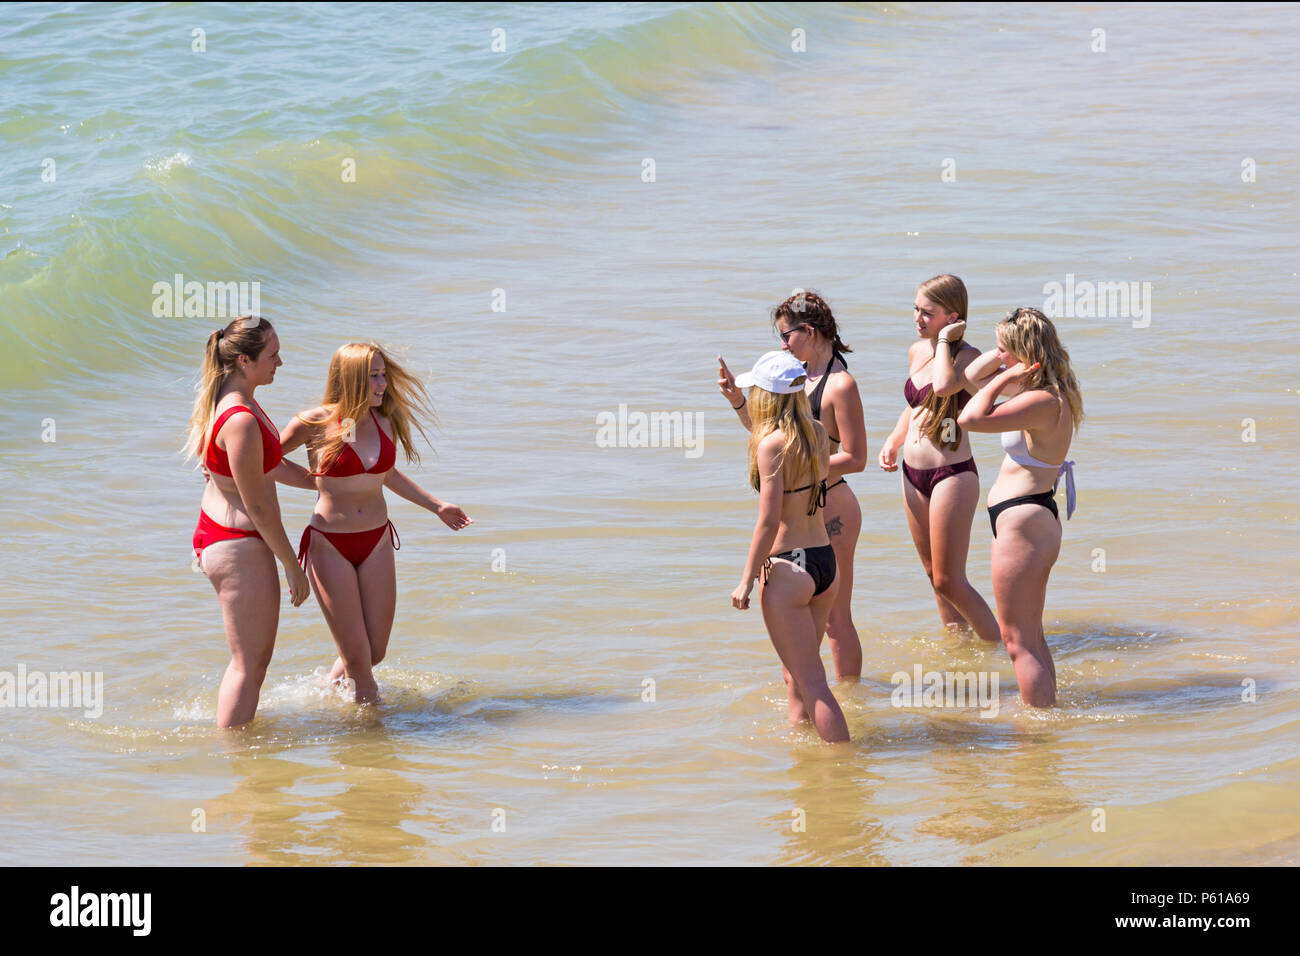 Bournemouth, Dorset, UK. 28th June, 2018. UK weather: sunseekers head to the beaches at Bournemouth on another hot sunny day with unbroken blue skies and sunshine. A slight breeze makes the heat more bearable. A group of friends in skimpy bikinis have fun playing in the sea and taking photos. Credit: Carolyn Jenkins/Alamy Live News Stock Photo